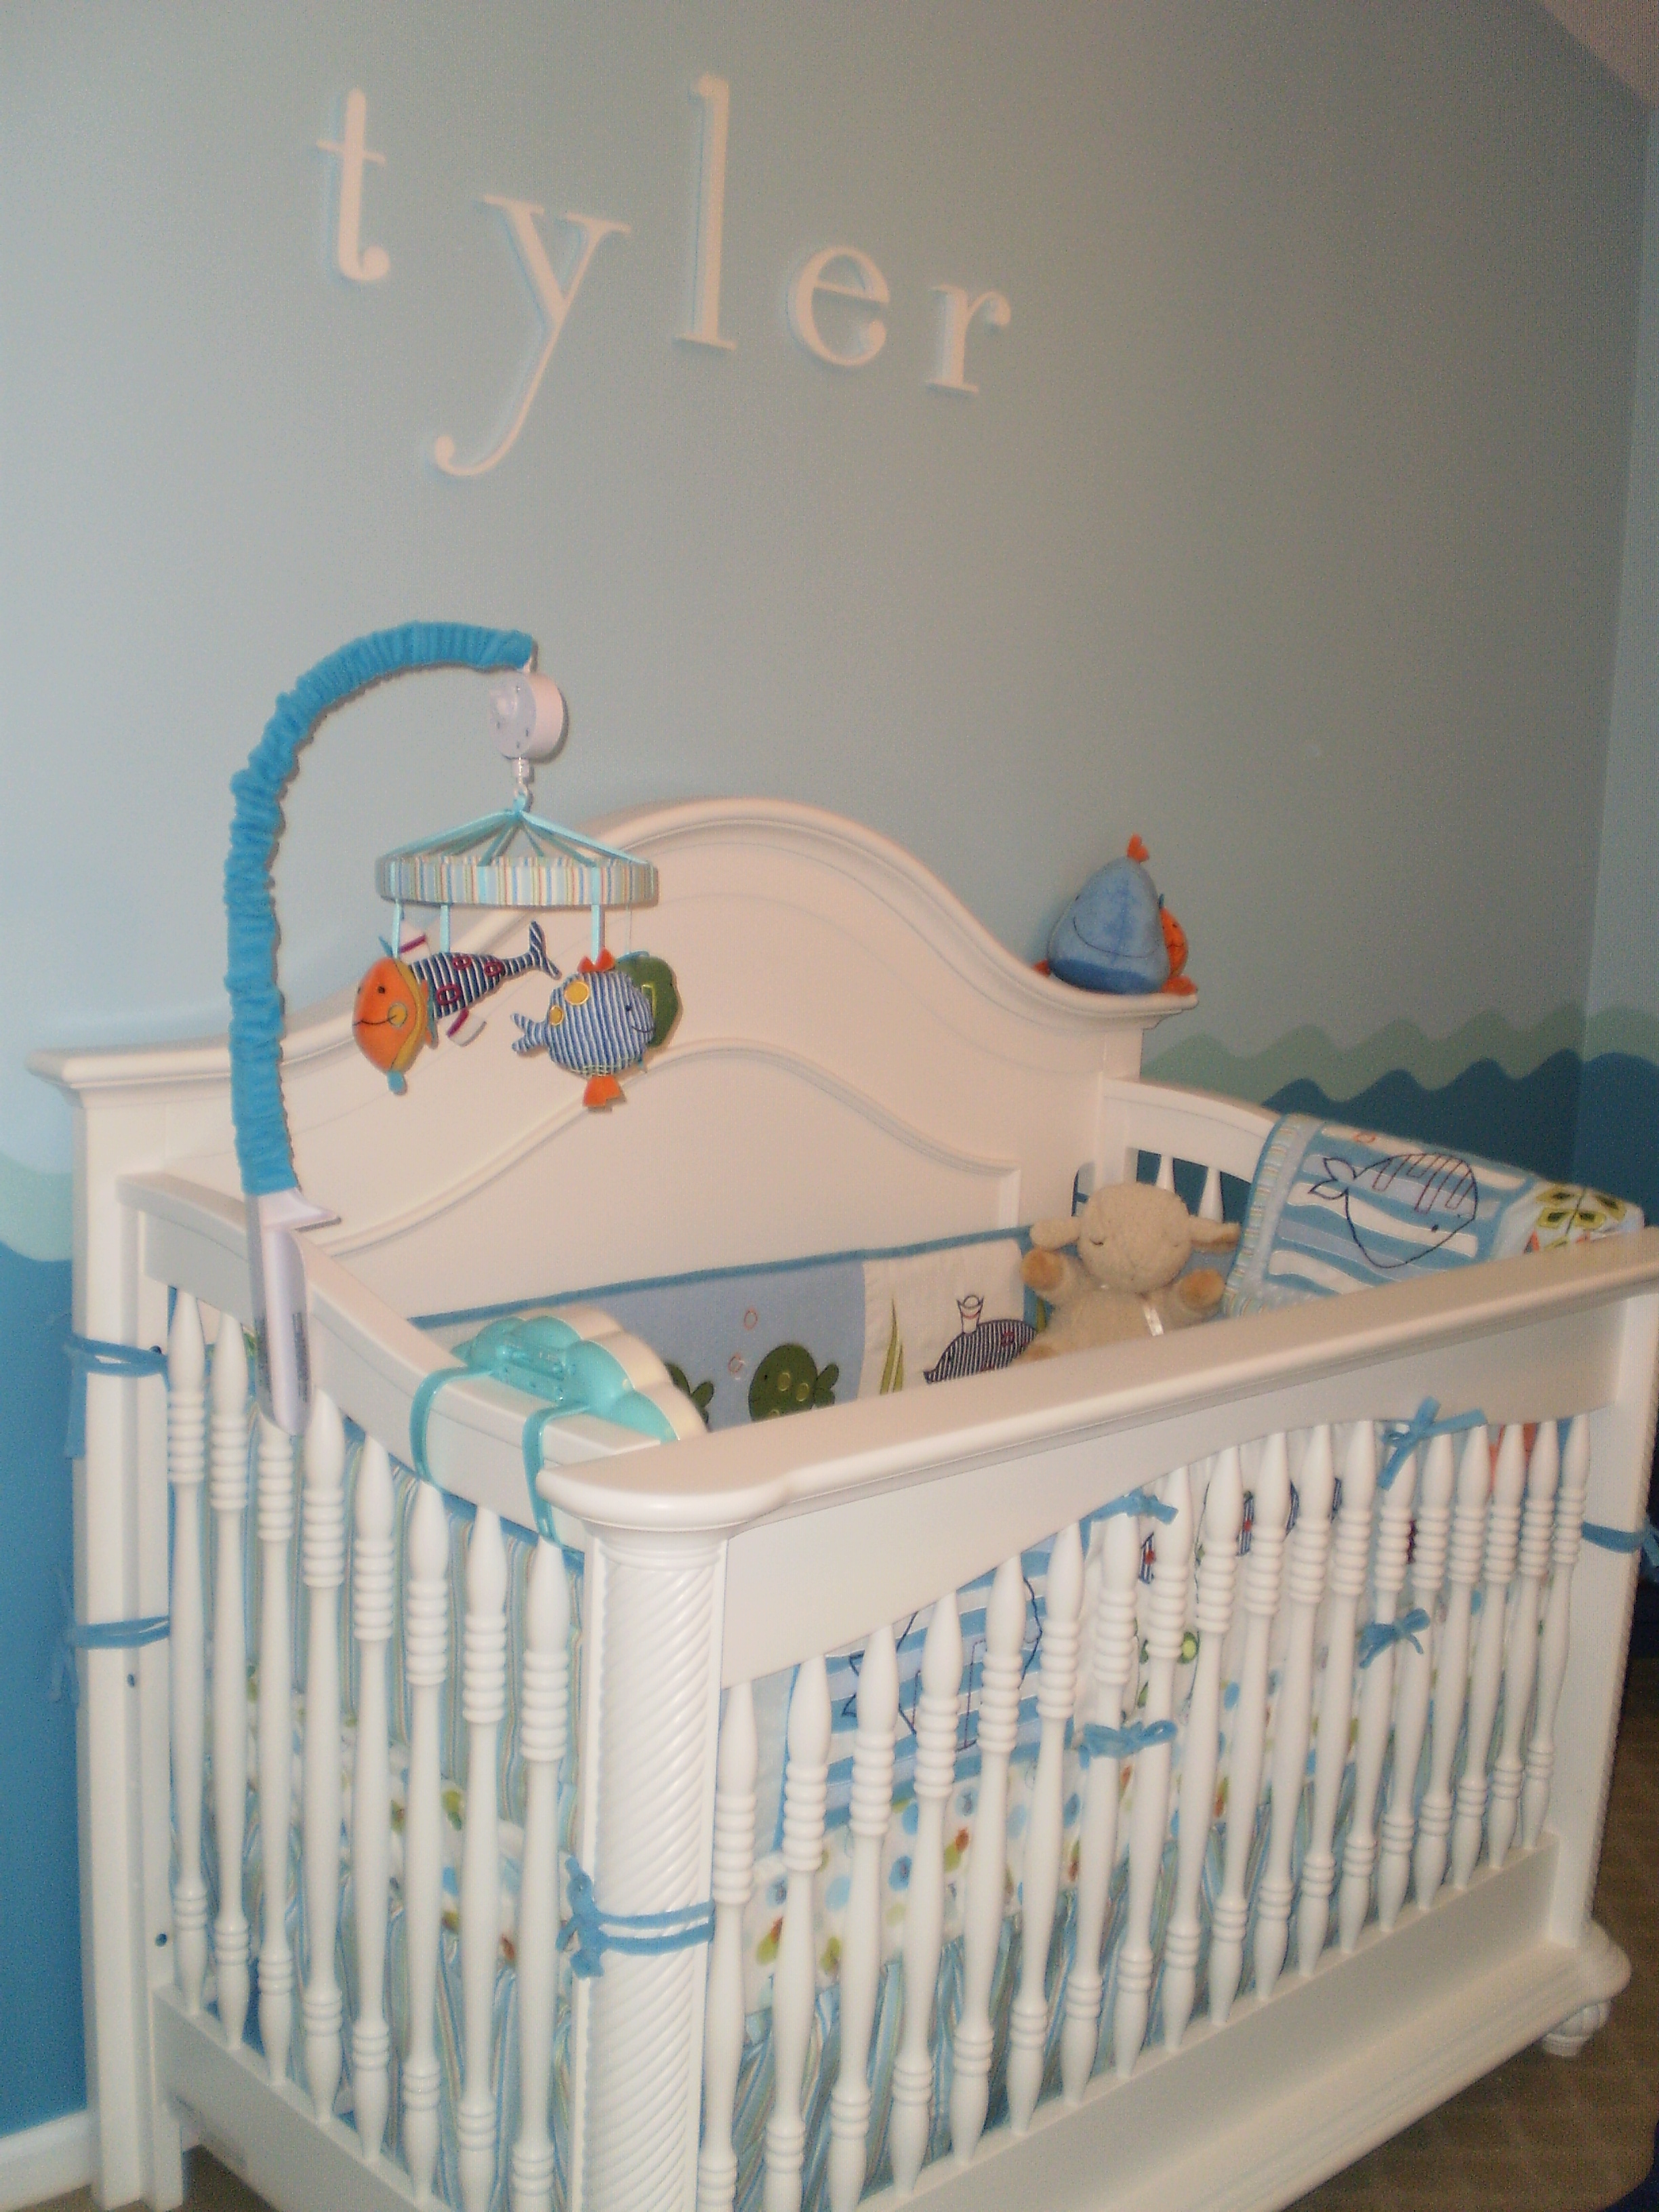 Tyler's 5th Birthday: Under the Sea Party - Project Nursery